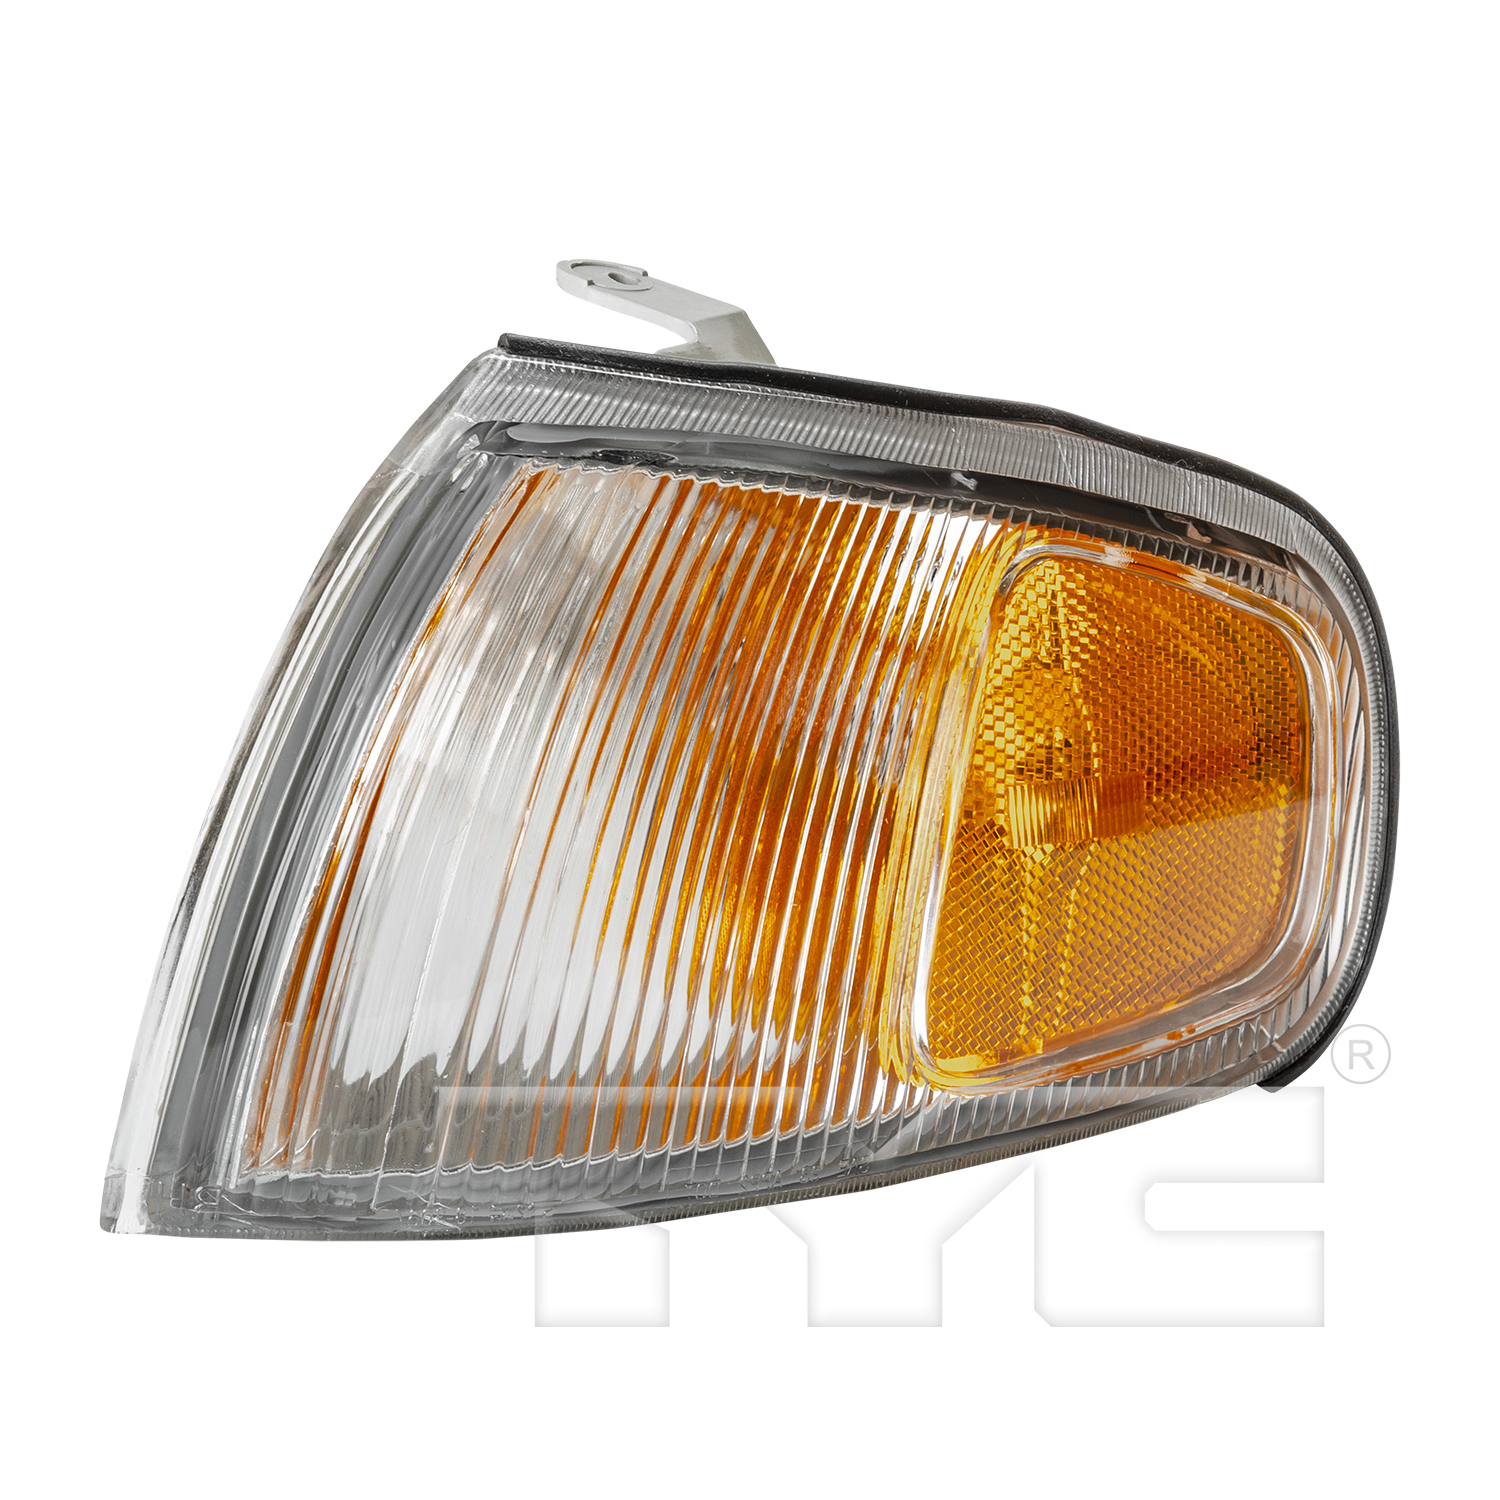 Aftermarket LAMPS for TOYOTA - CAMRY, CAMRY,95-96,LT Parklamp assy